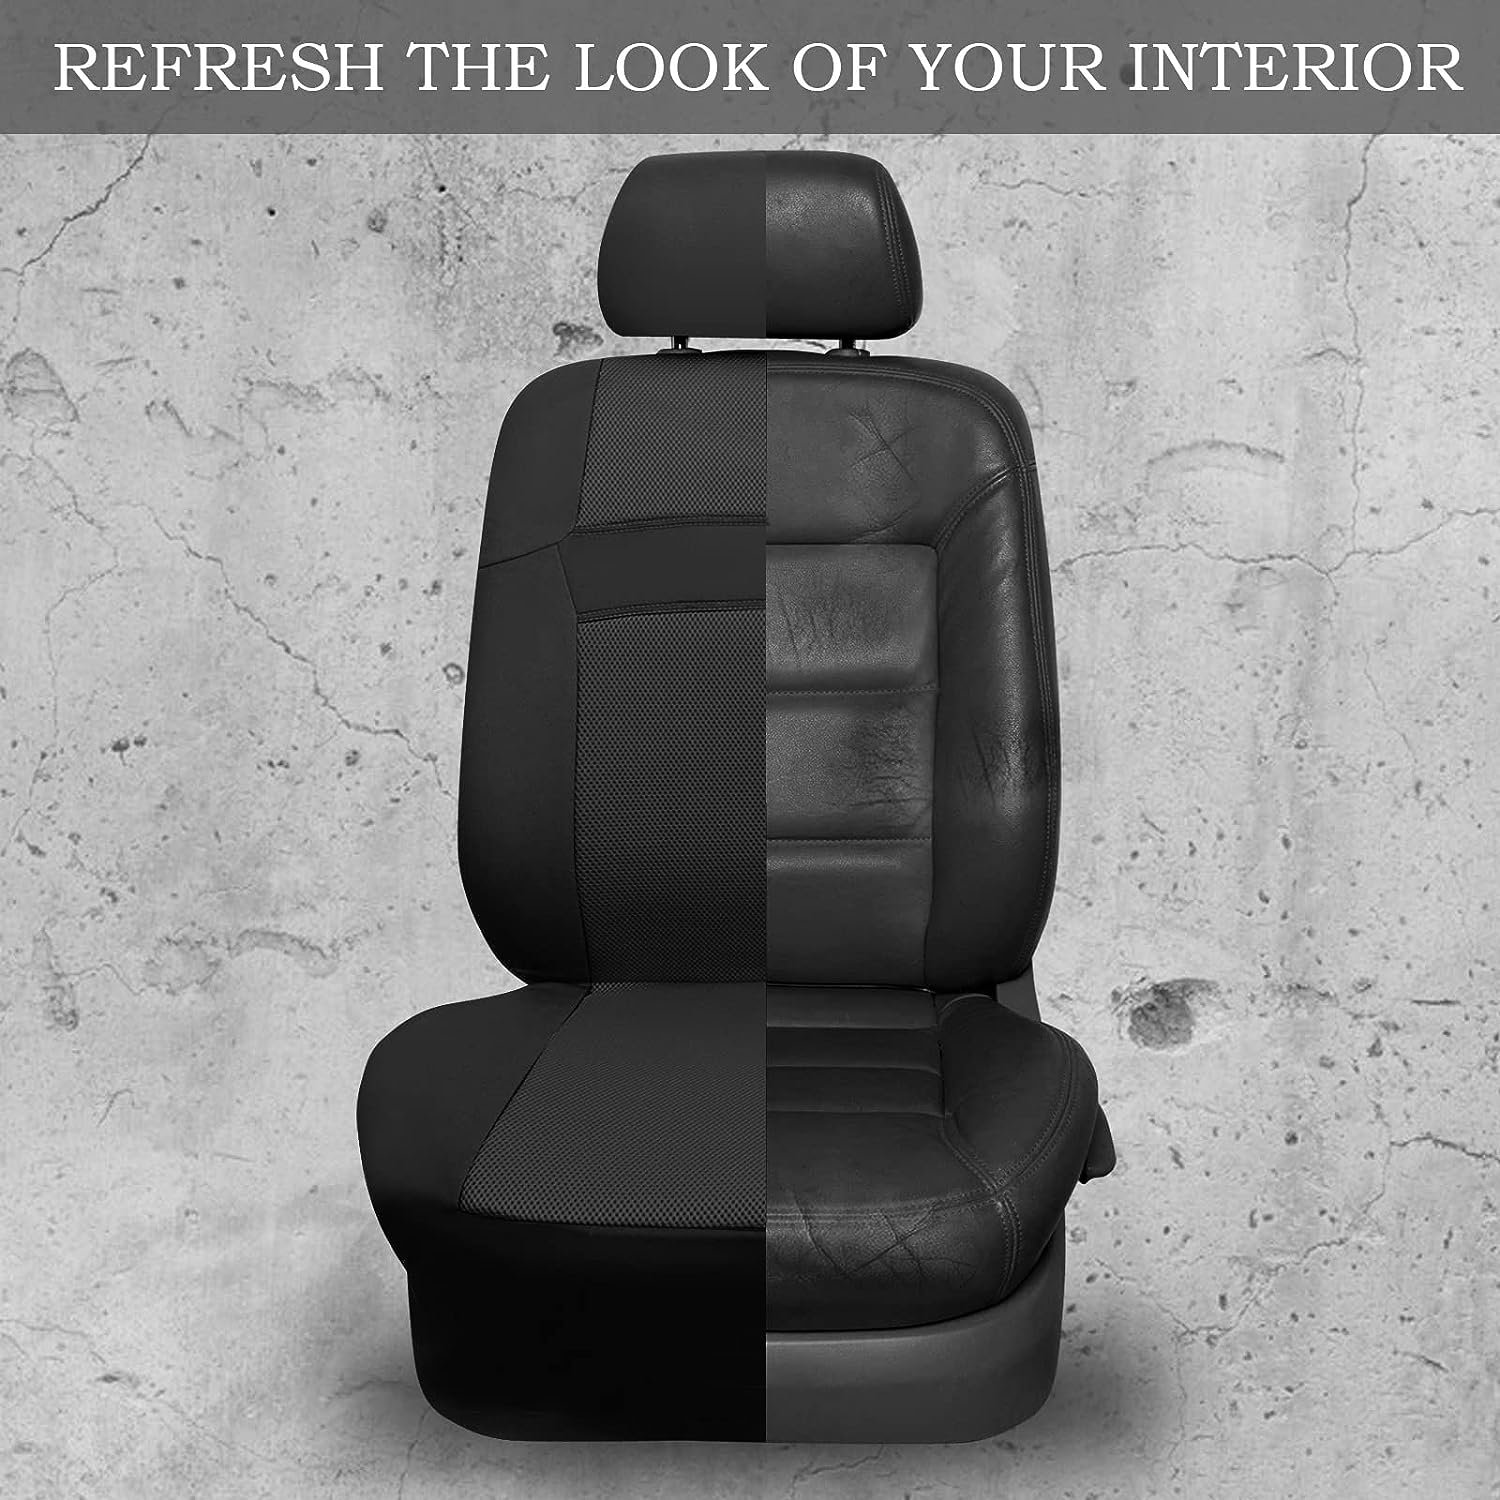 CAR PASS Seat Cover Full Sets, 3D Air Mesh Charcoal Car Seat Cover with 5mm Composite Sponge Inside,Airbag Compatible Universal Fit for SUV,Vans,sedans, Trucks, Automotive Interior Covers(Black Gray)